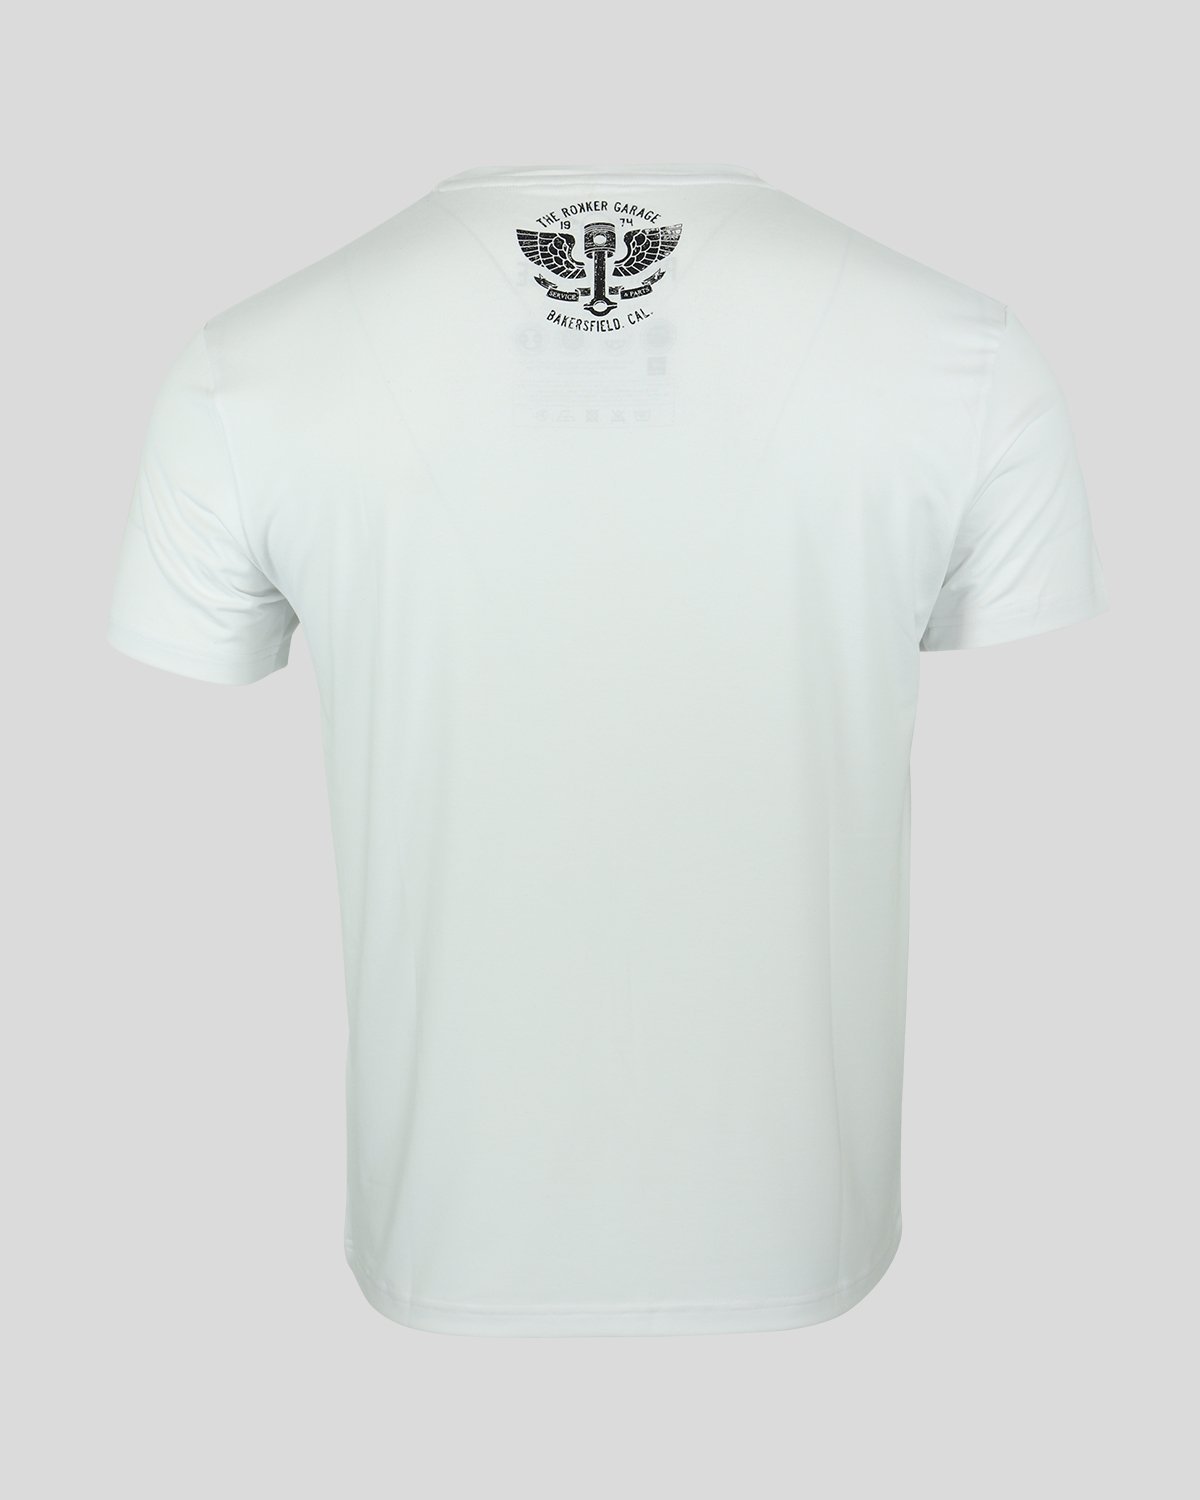 Performance Tee Bakersfield White T-Shirt The Rokker Company 